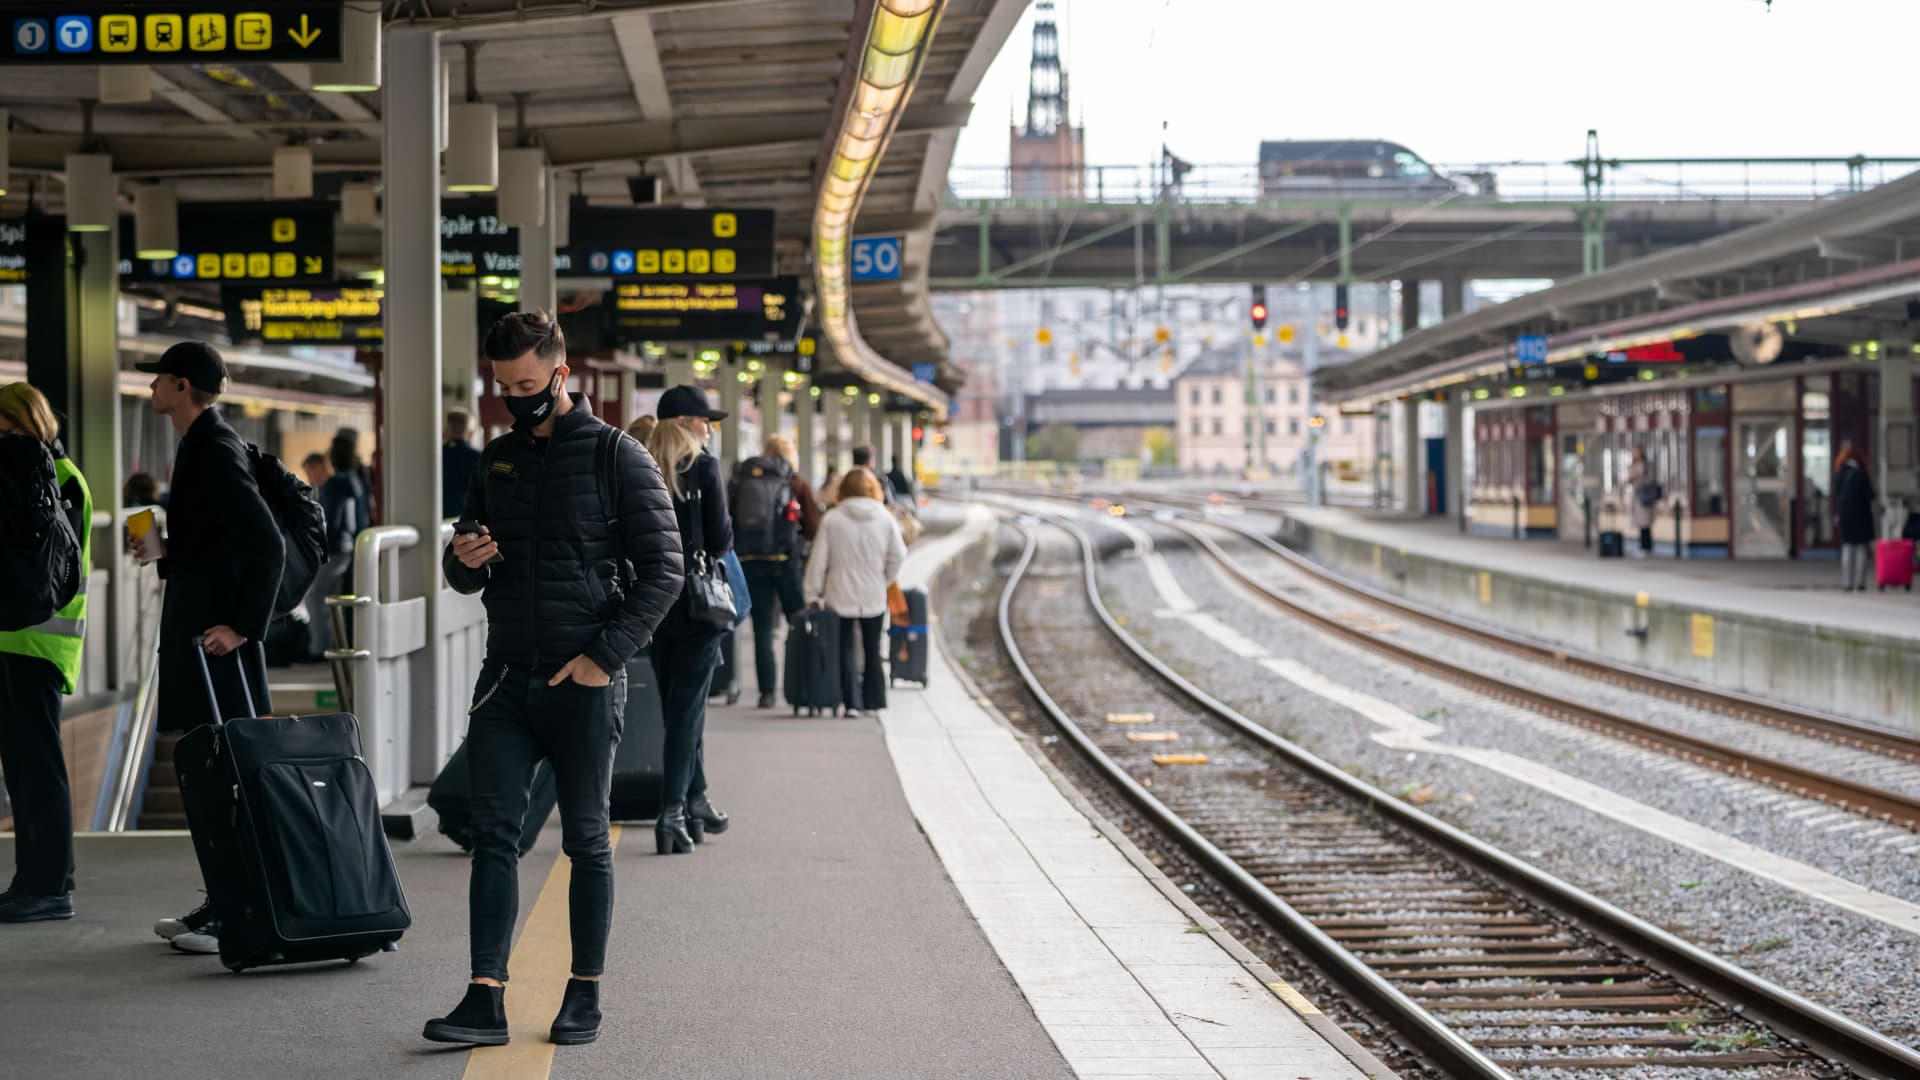 A man wearing a face mask waits for a train in the central train station during the COVID-19 pandemic in Stockholm, capital of Sweden, on Nov. 3, 2020.